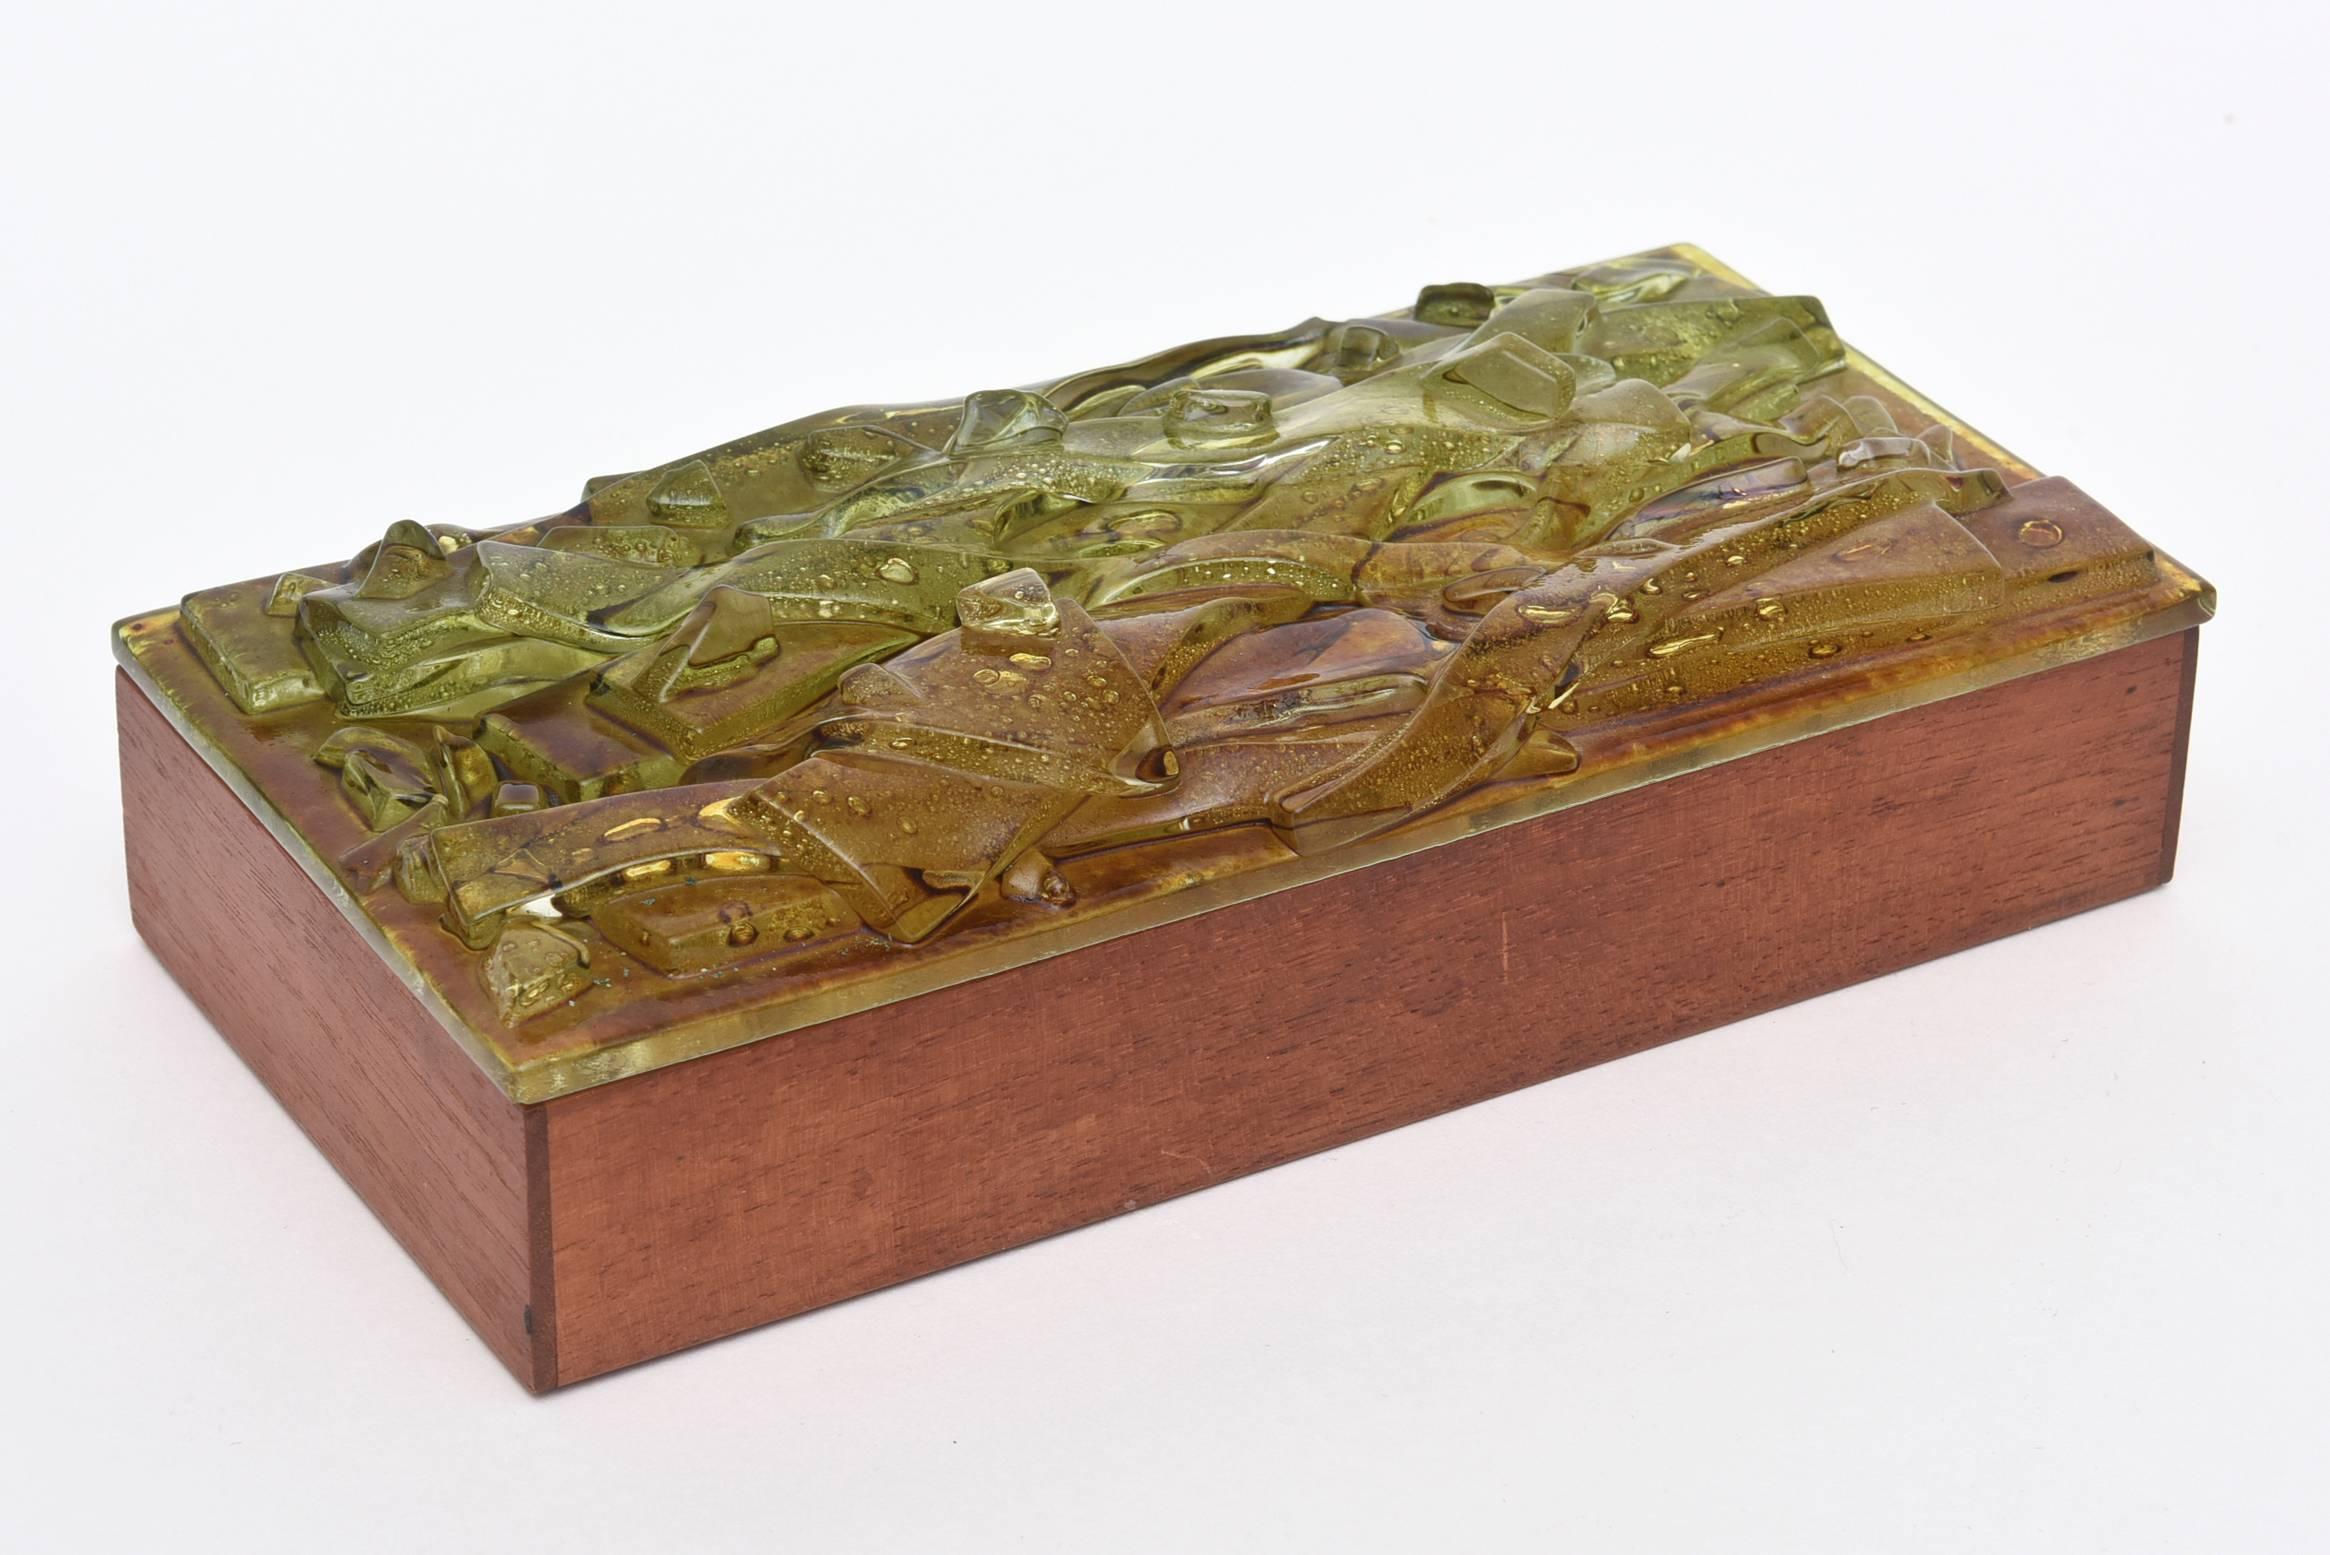 The beautiful vintage work of art fused glass on the top of the box is done by the artist: Robert Brown. It is so much in the style of Higgins Glass. The colors of the artistic fused glass are shades of green, amber cognac and brown. The original